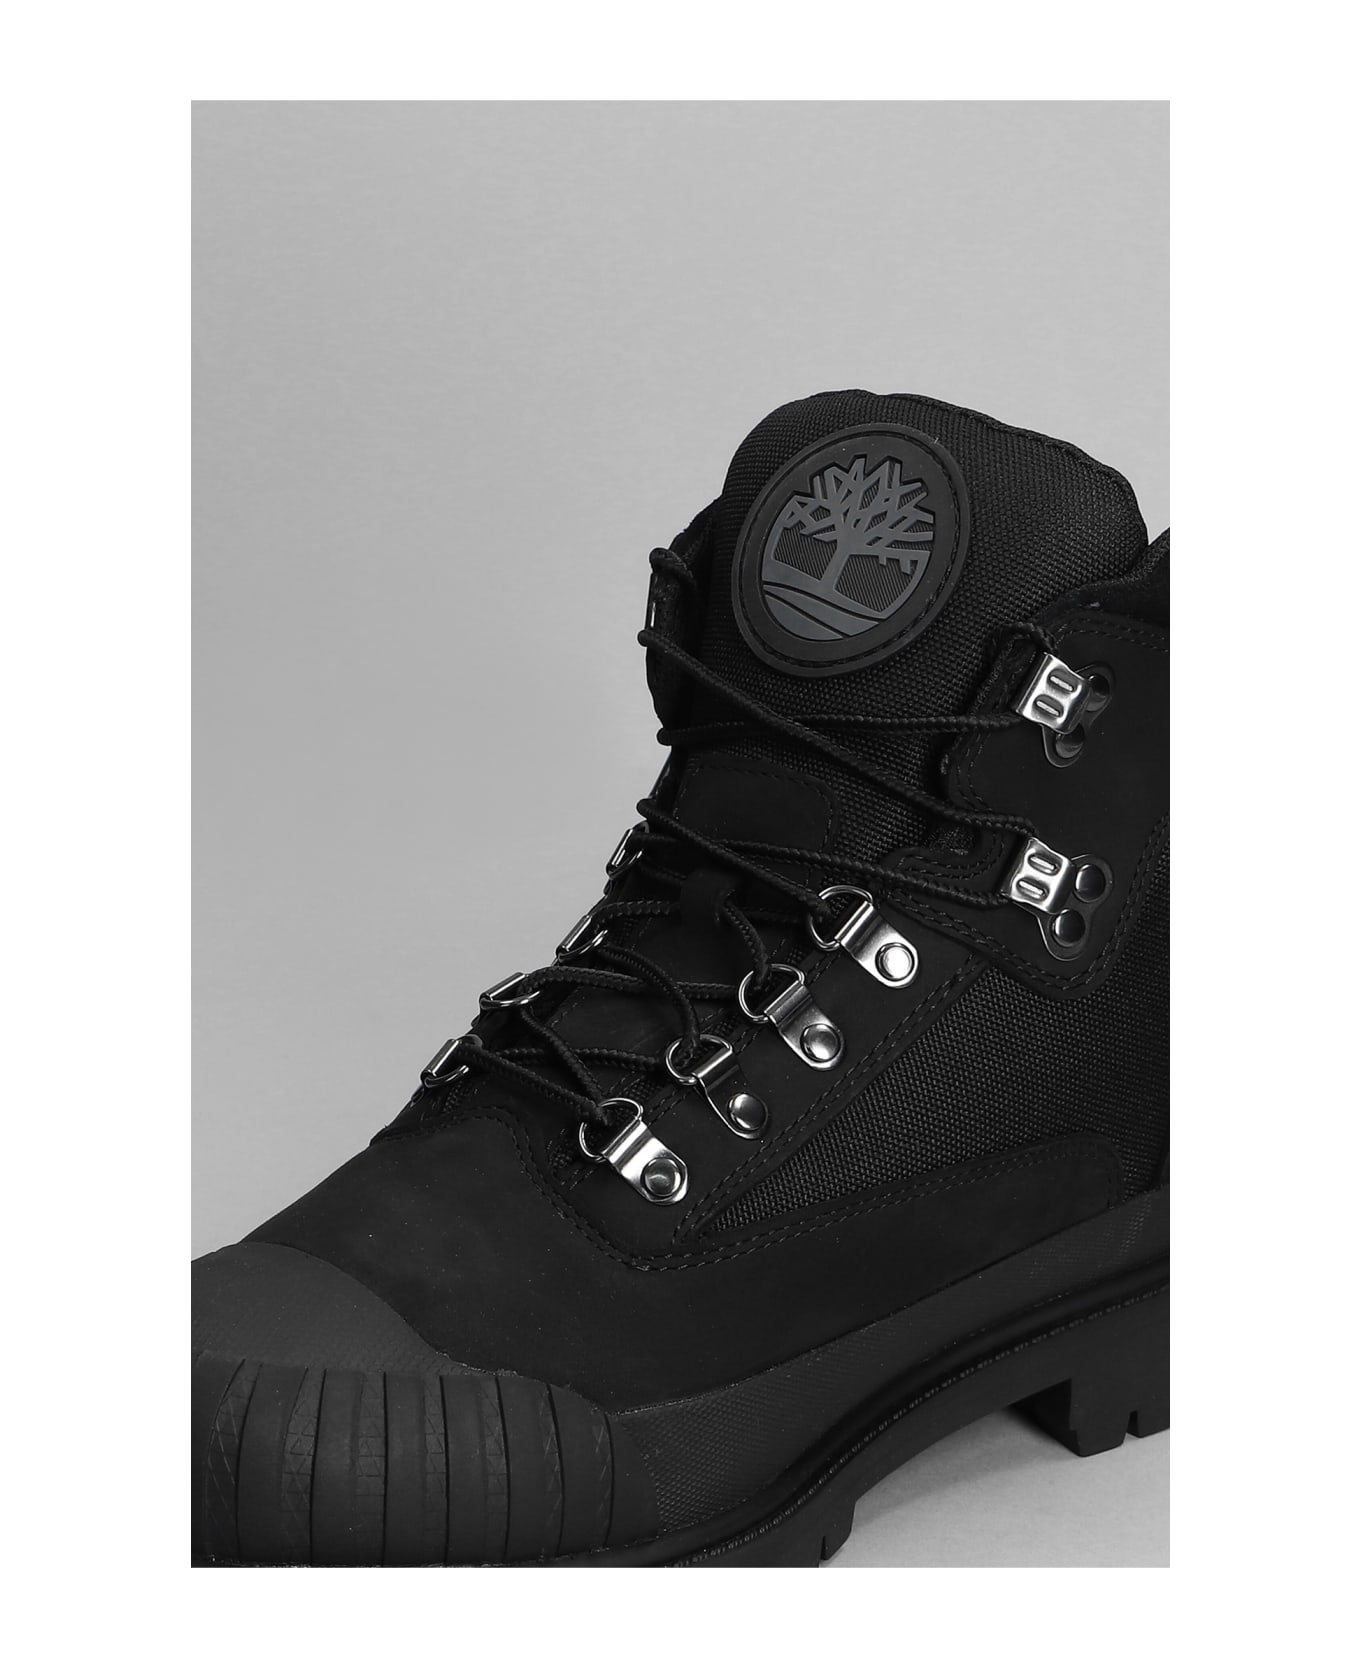 Timberland Heritage Boot Combat Boots In Black Synthetic Fibers - Black ブーツ